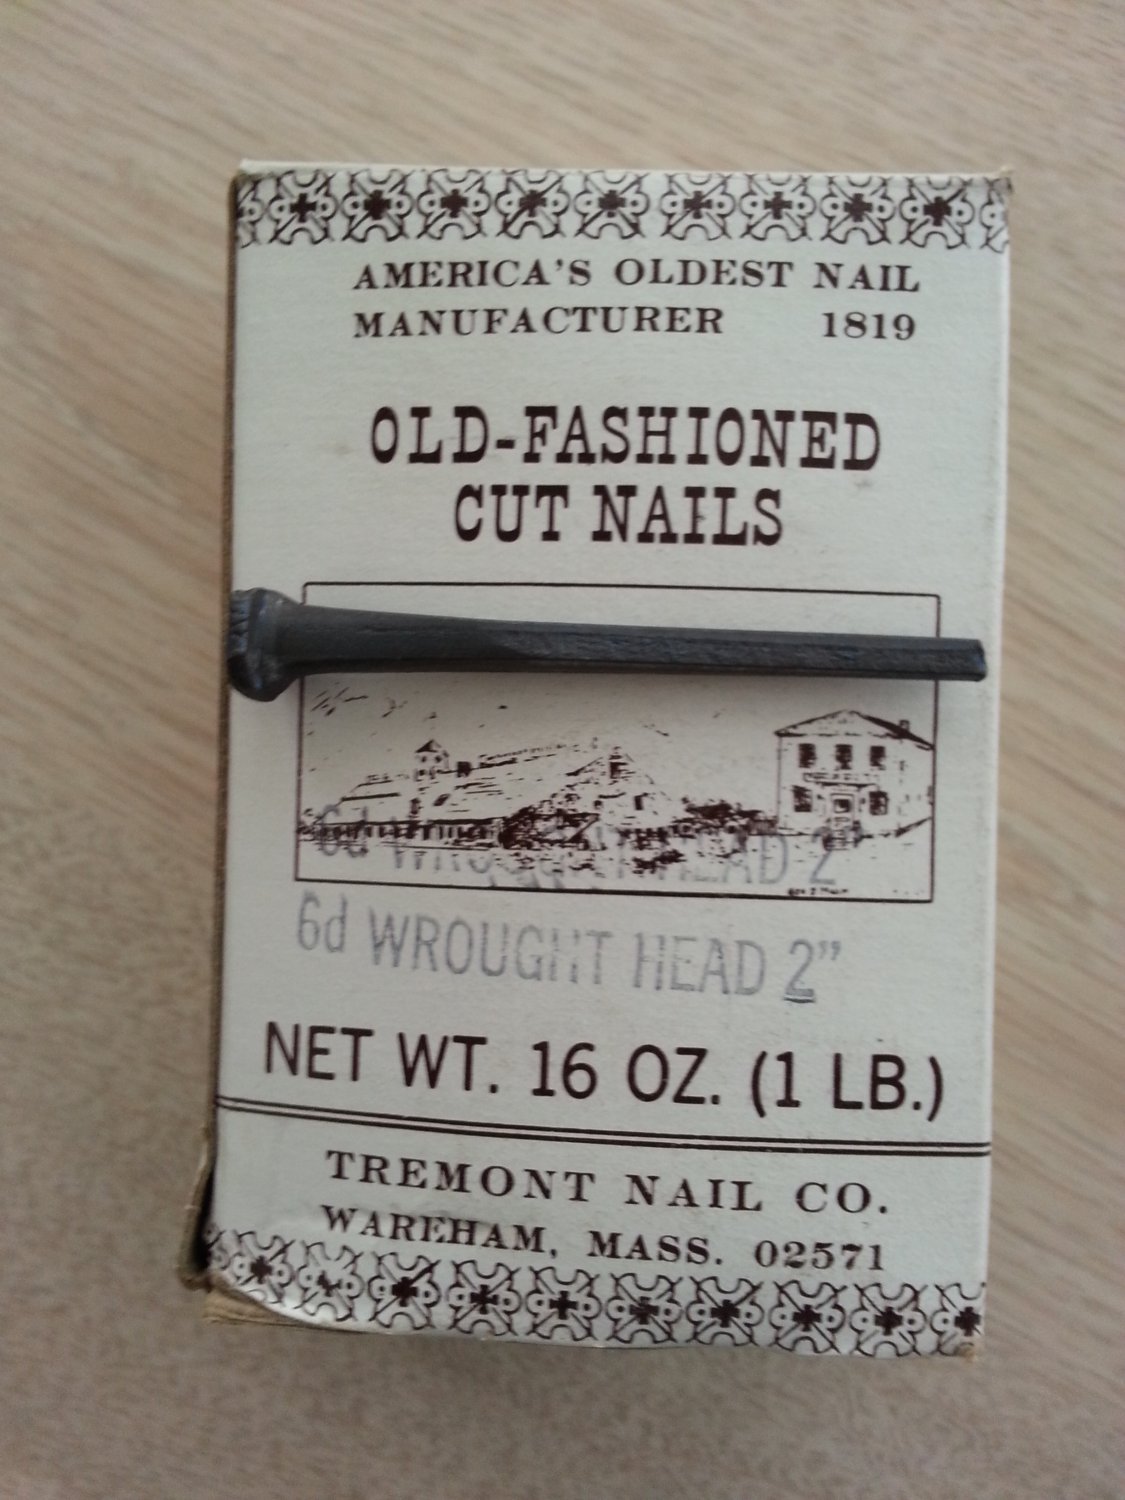 Old Fashioned Cut 6d Wrought Iron Head Nails 25 Inch 1 Lb 8 Oz within Fantastic Old Fashioned Cut Nails – Best Photo Source